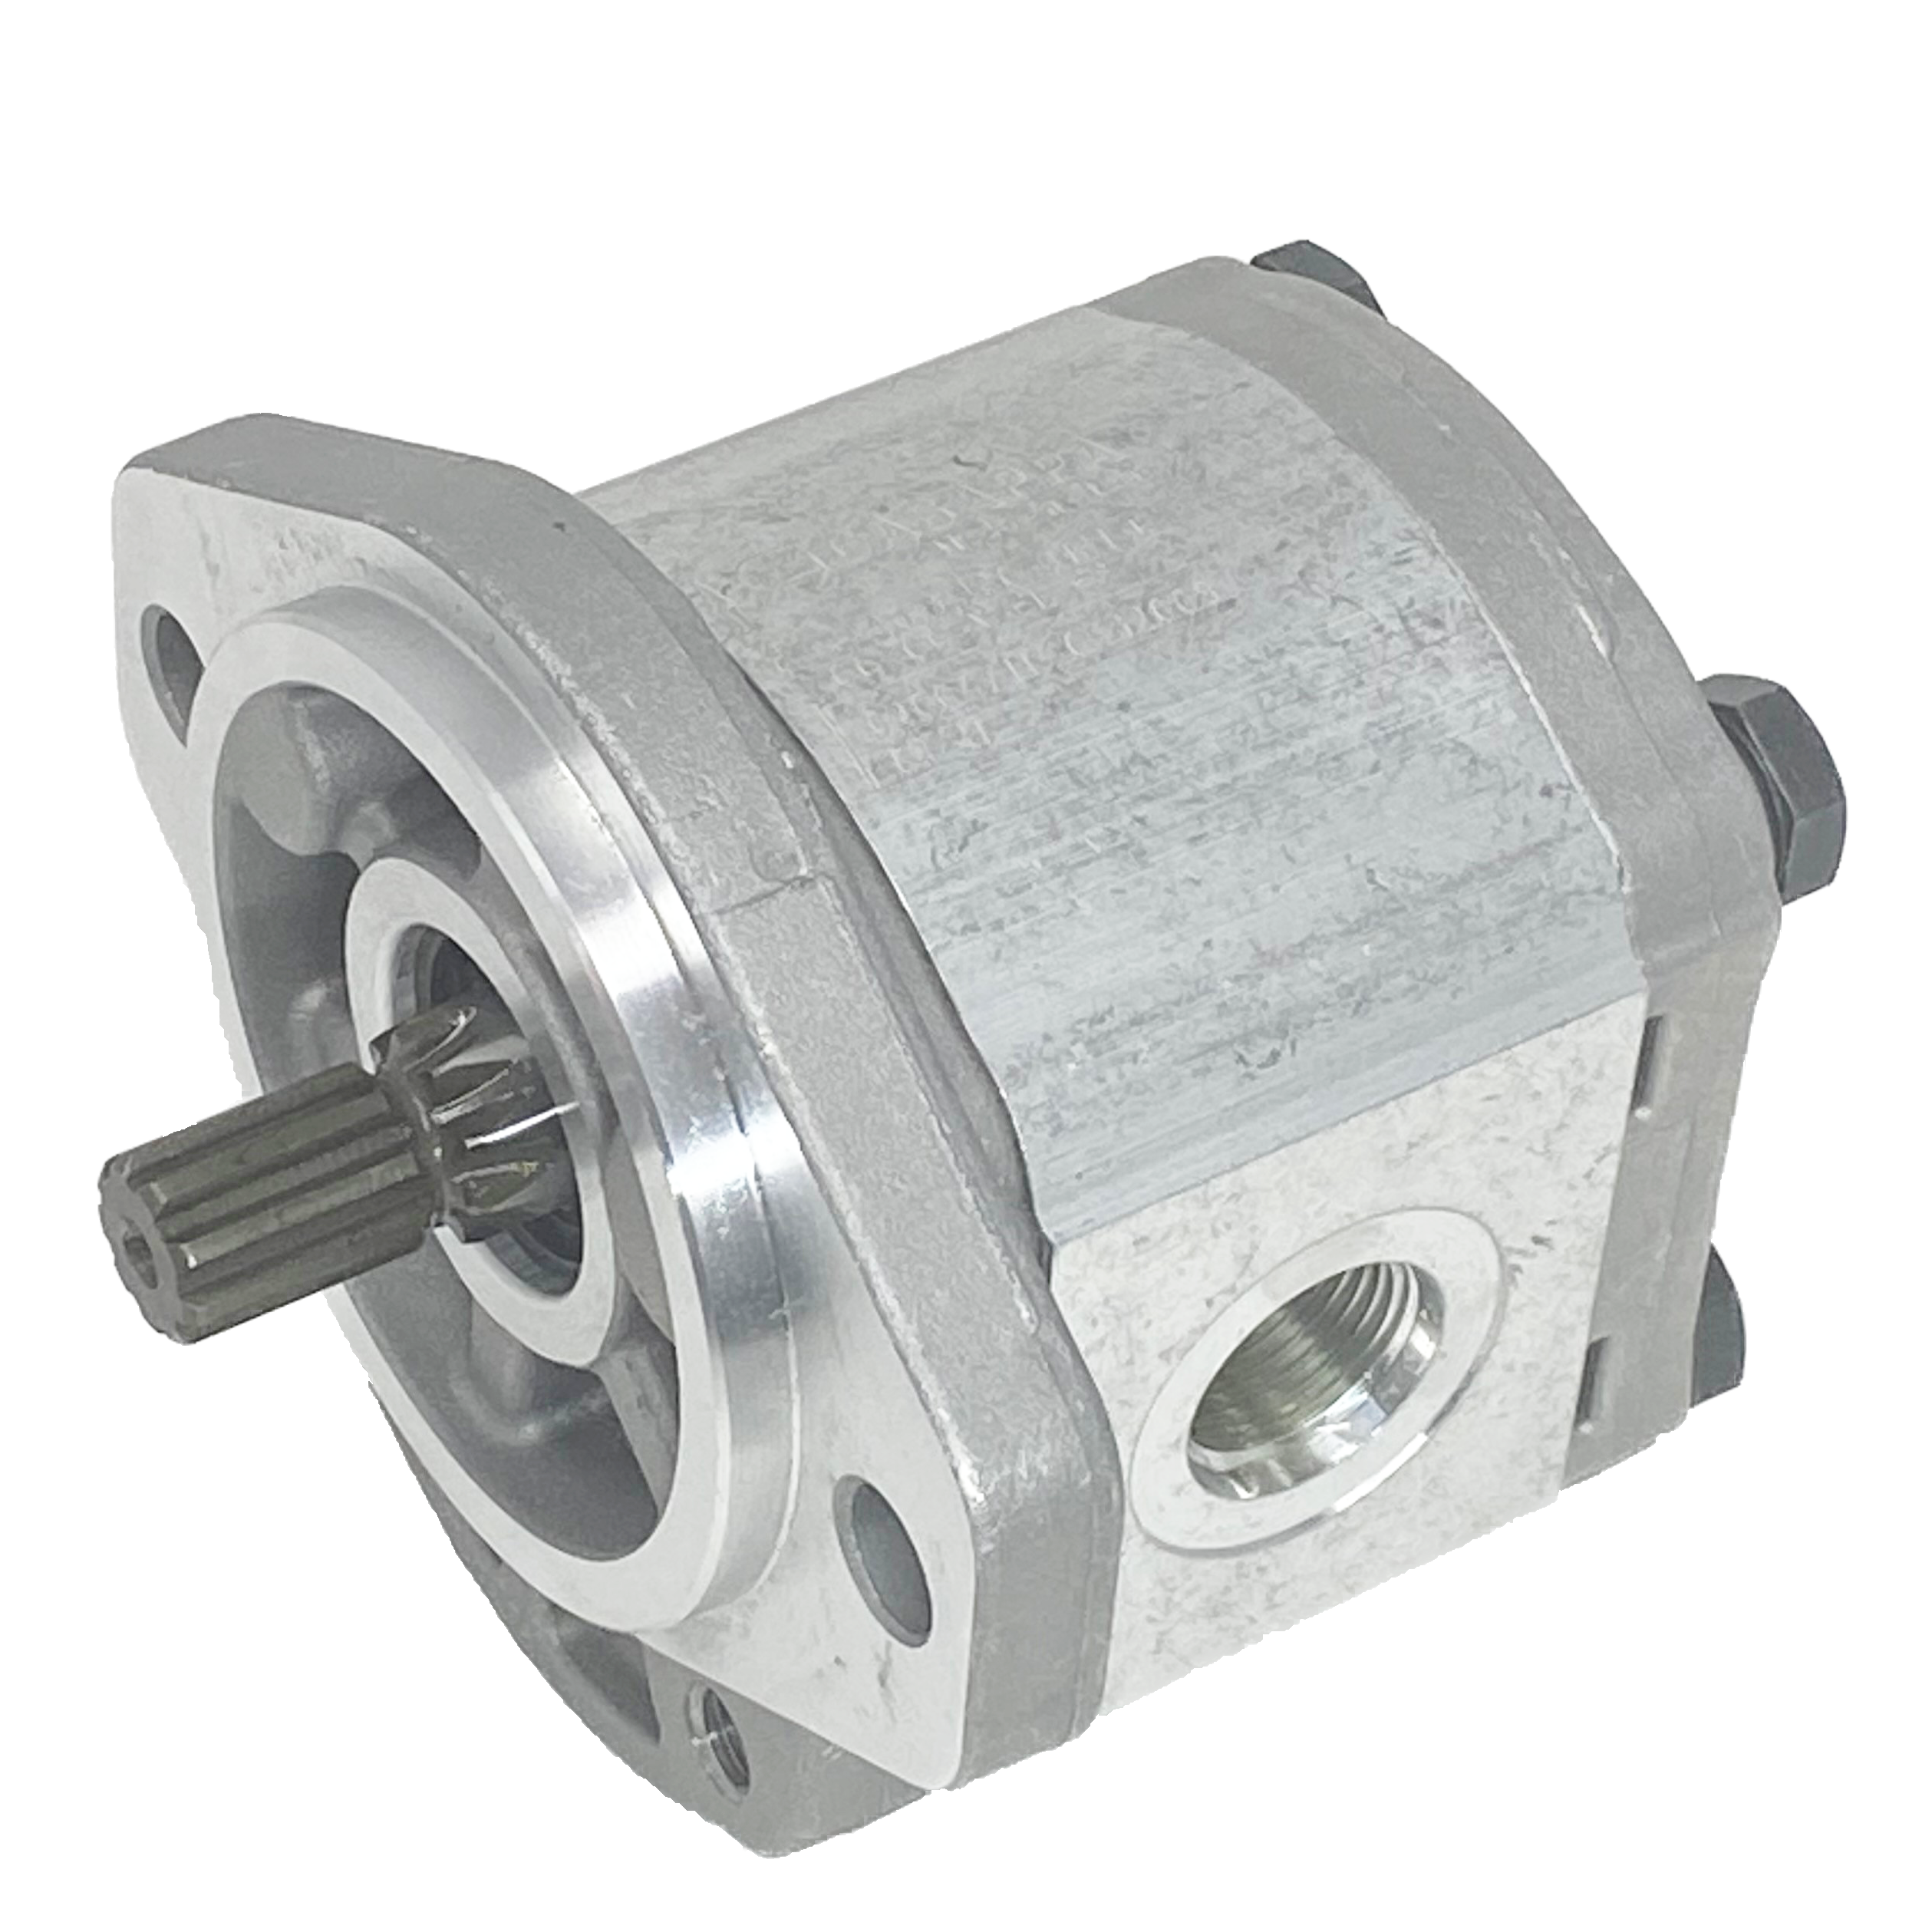 PLP20.8S0-31S1-LOF/OC-S7-N-EL-FS : Casappa Polaris Gear Pump, 8.26cc, 3625psi Rated, 3500RPM, CCW, 5/8" Keyed Shaft, SAE A 2-Bolt Flange, 1" #16 SAE Inlet, 0.625 (5/8") #10 SAE Outlet, Aluminum Body & Flange